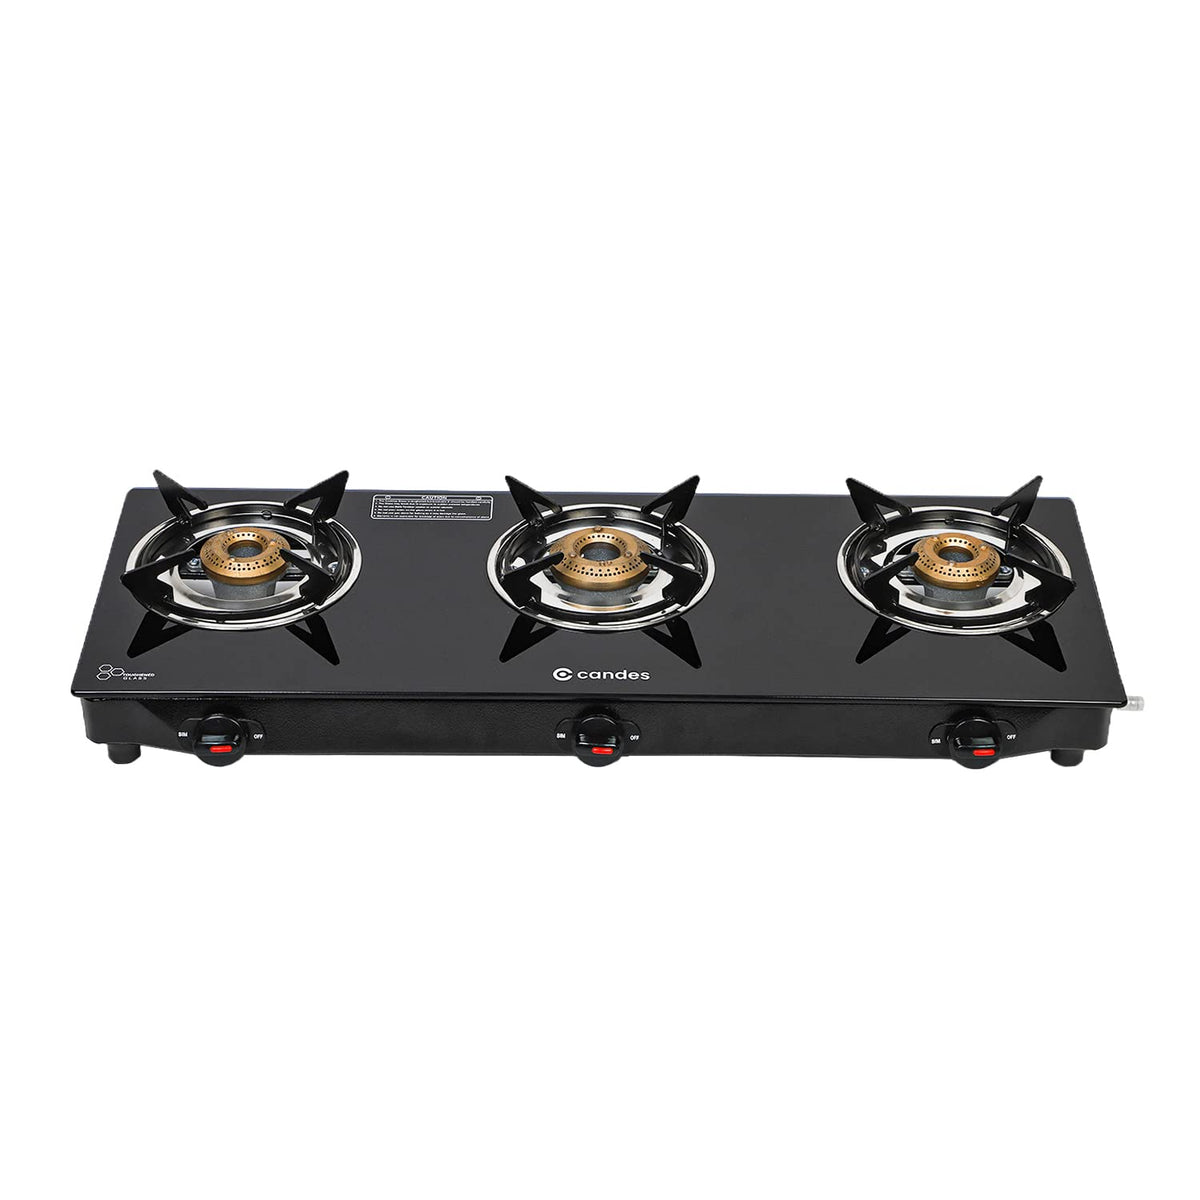 Candes Glass Gas Stove 3 Burners Premium Die Cast Alloy | Manual Ignition Tornado Burner With 6 mm Toughened Glass Top | Nylon Ergonomics Knob | LPG Compatible | ISI Certified | 1 Yr Warranty | Black